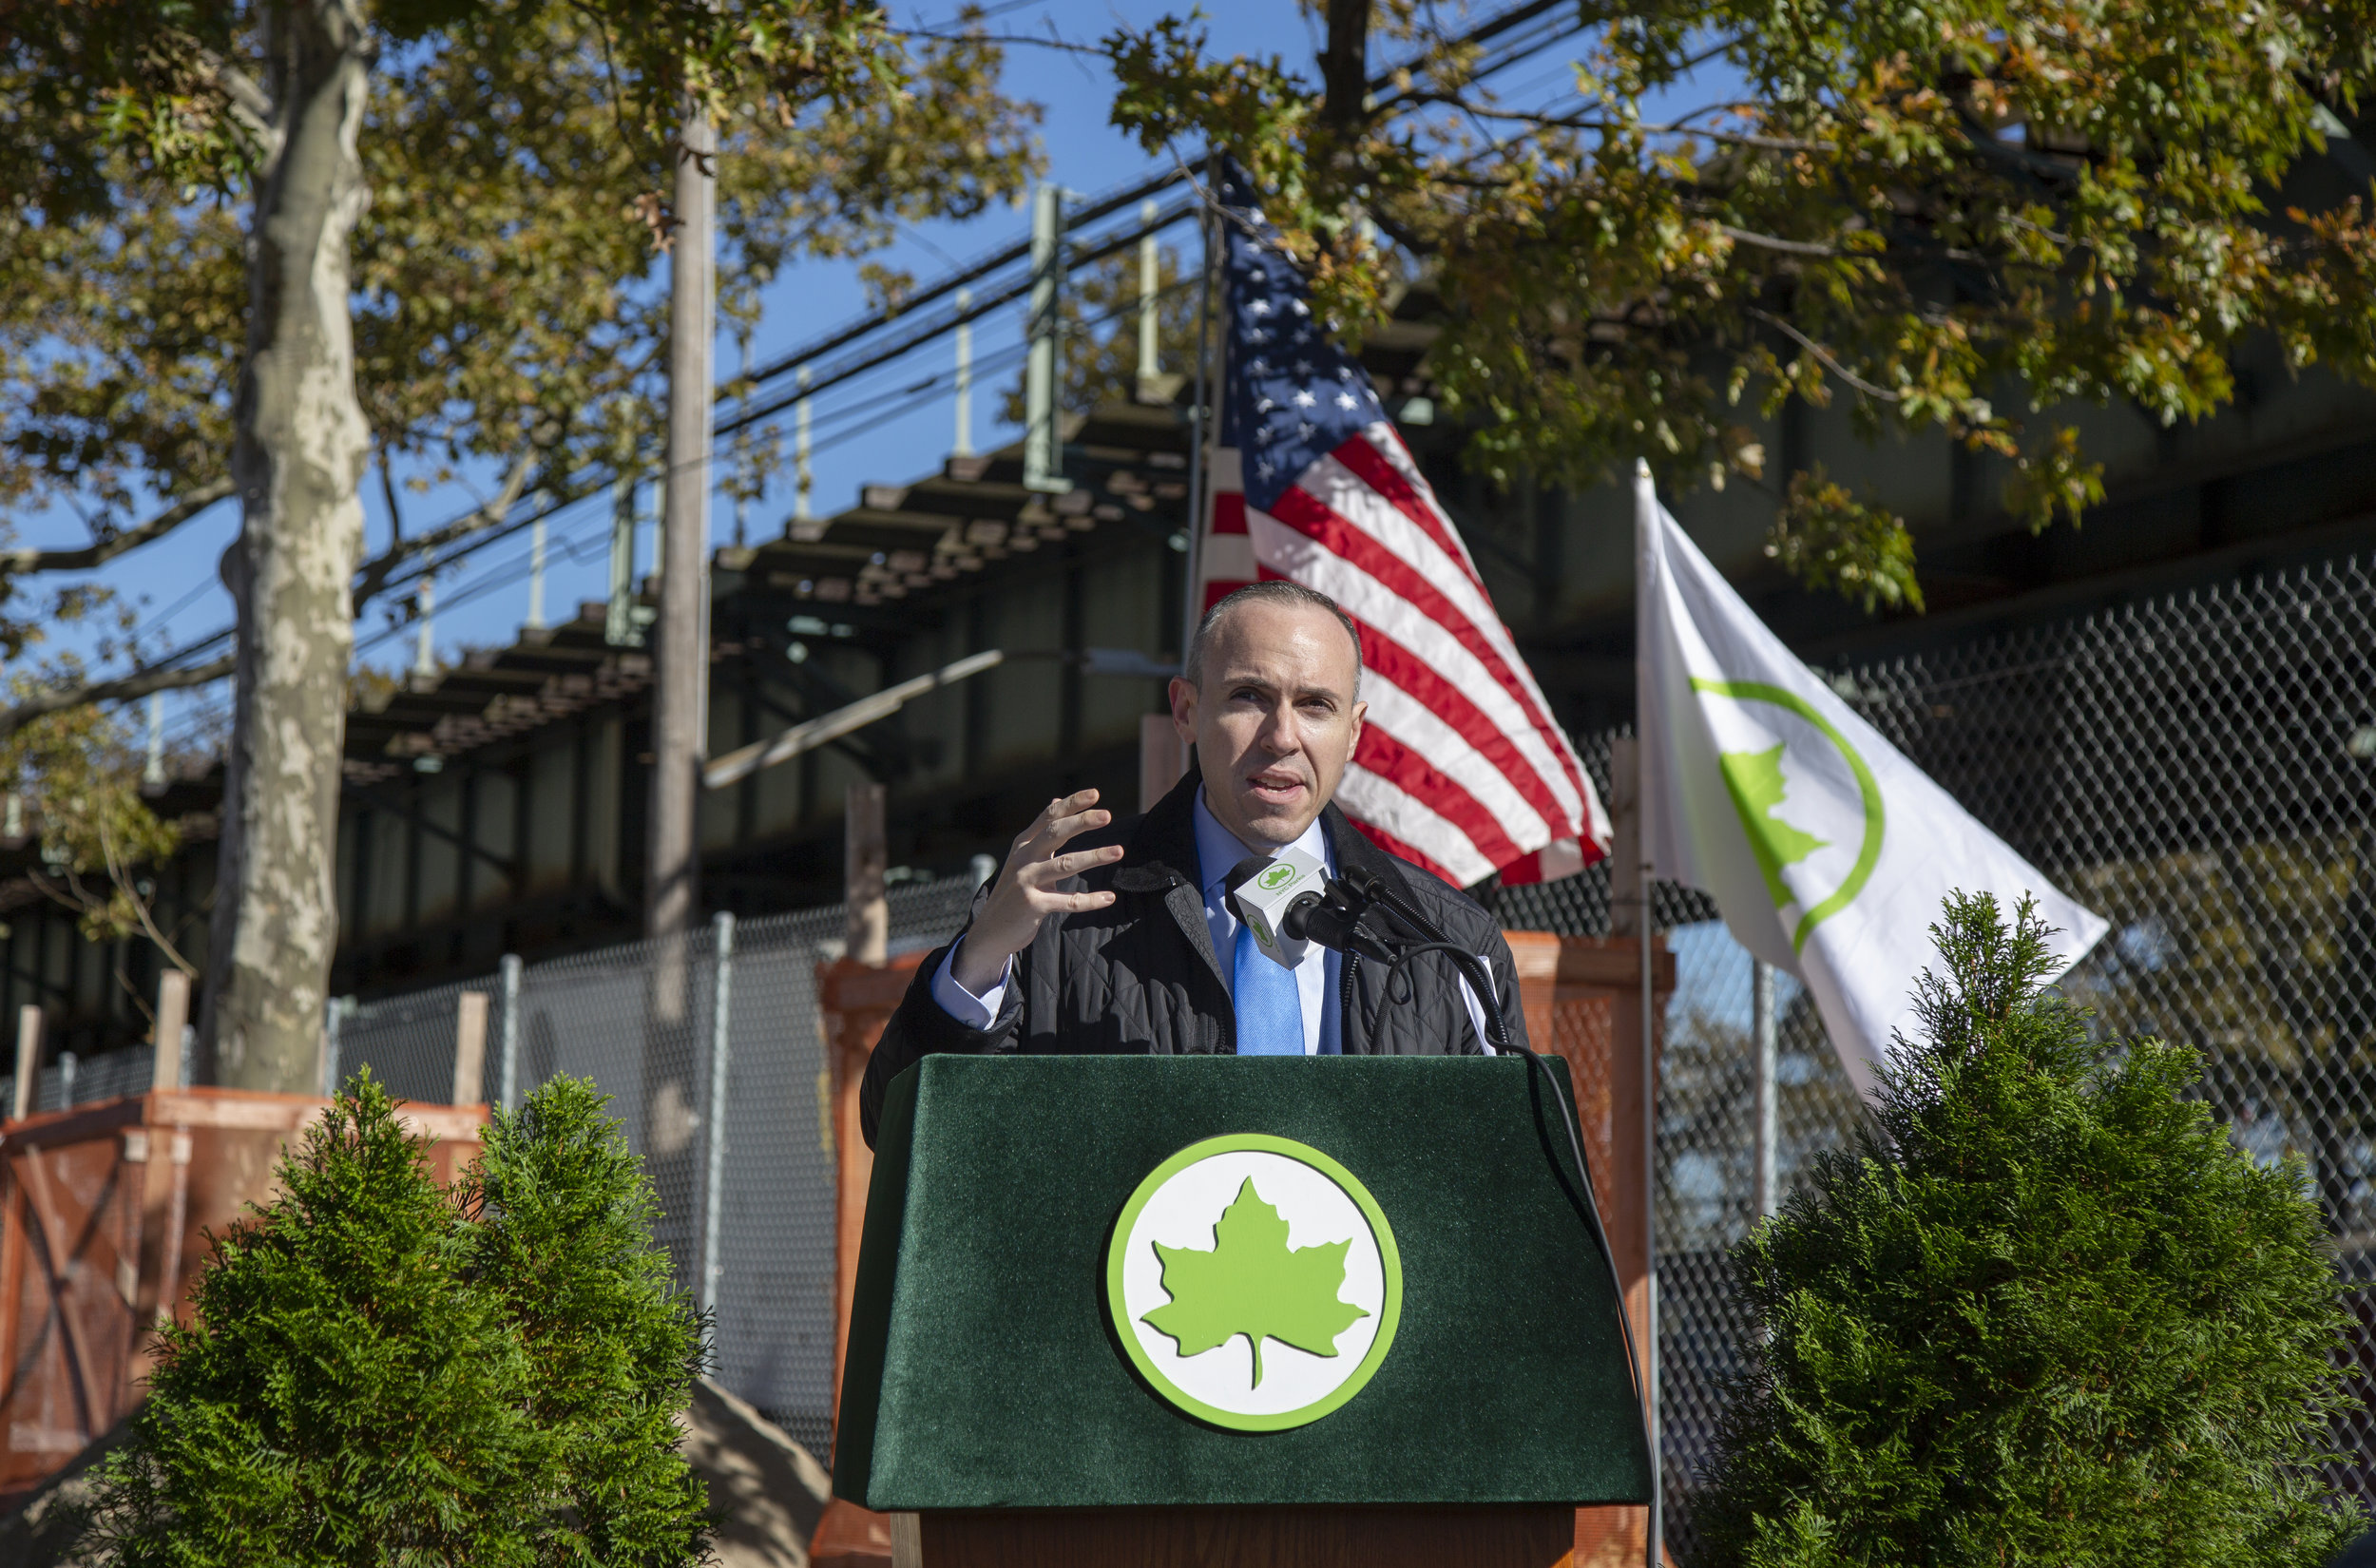 City Council Member Mark Treyger During Groundbreaking Ceremony For New Park In His District